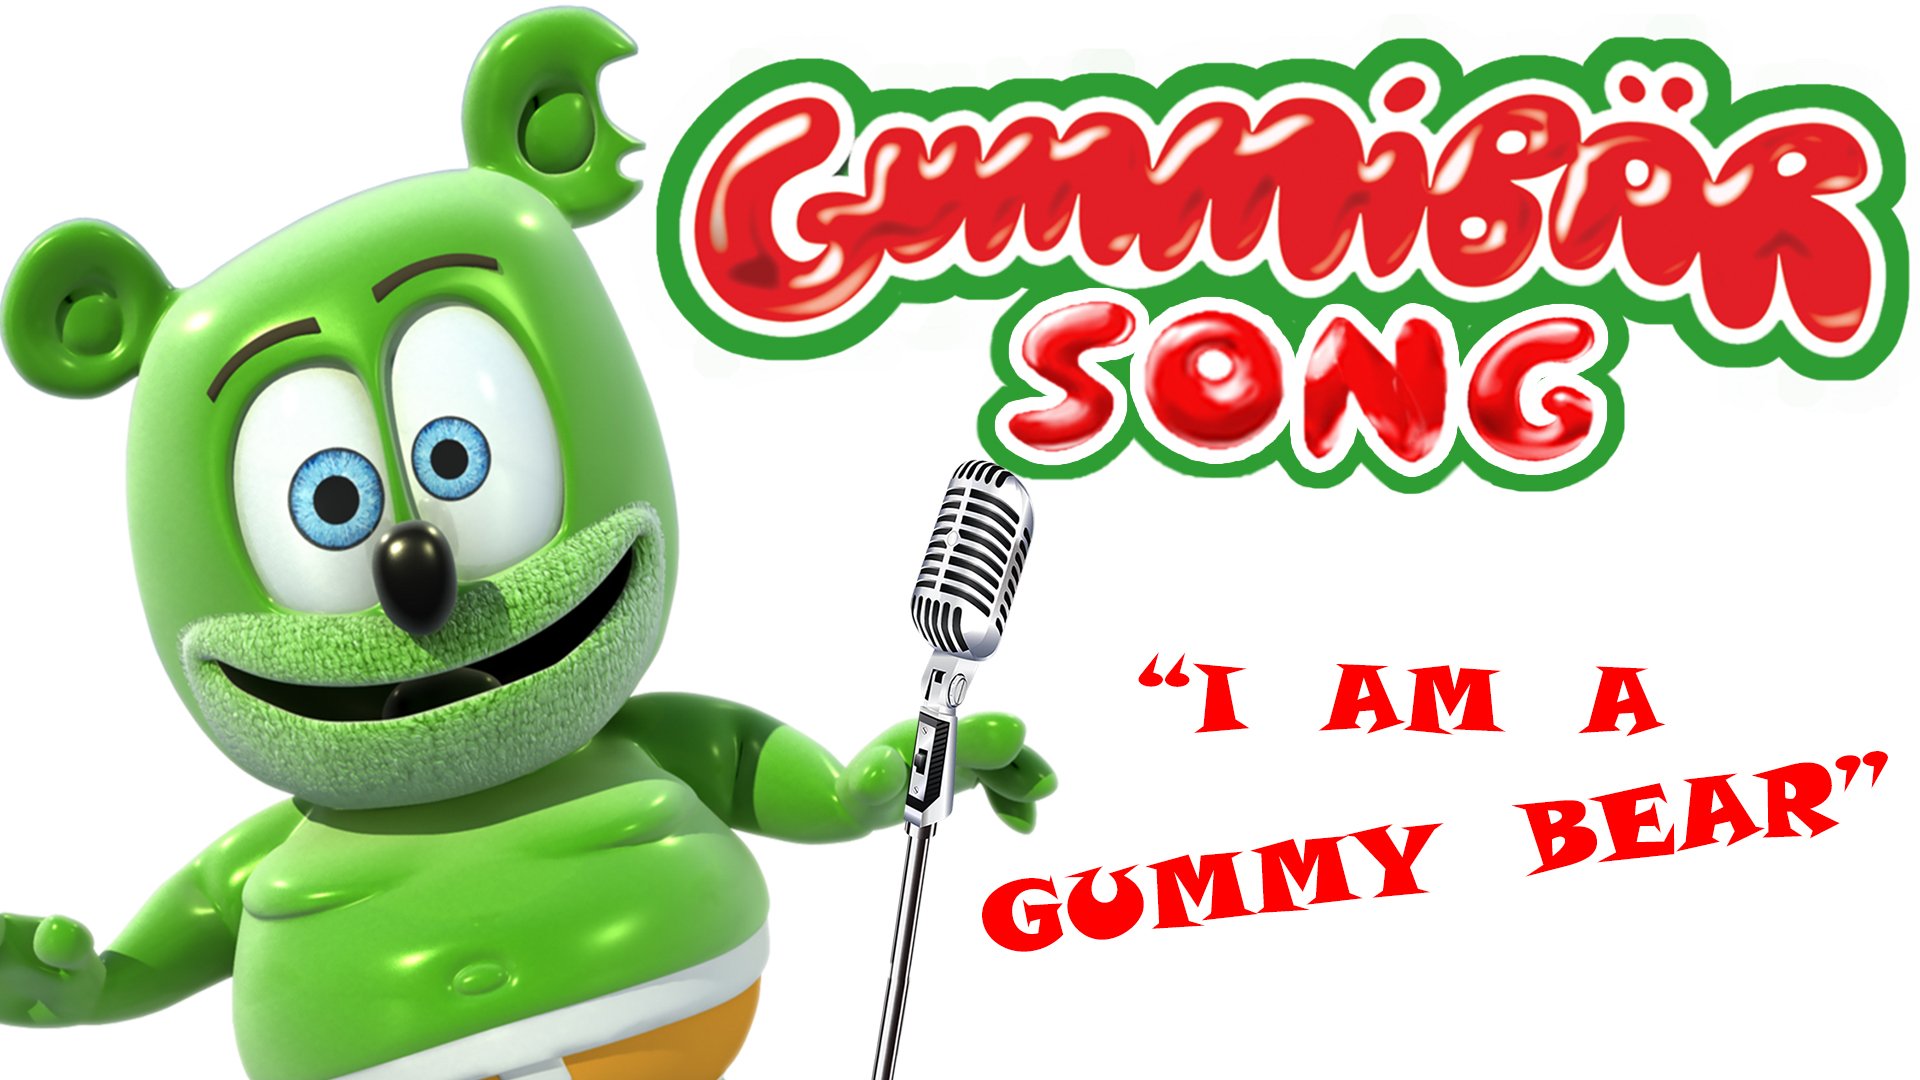 Toonz Animation and Gummybear International Sign Content Deal For